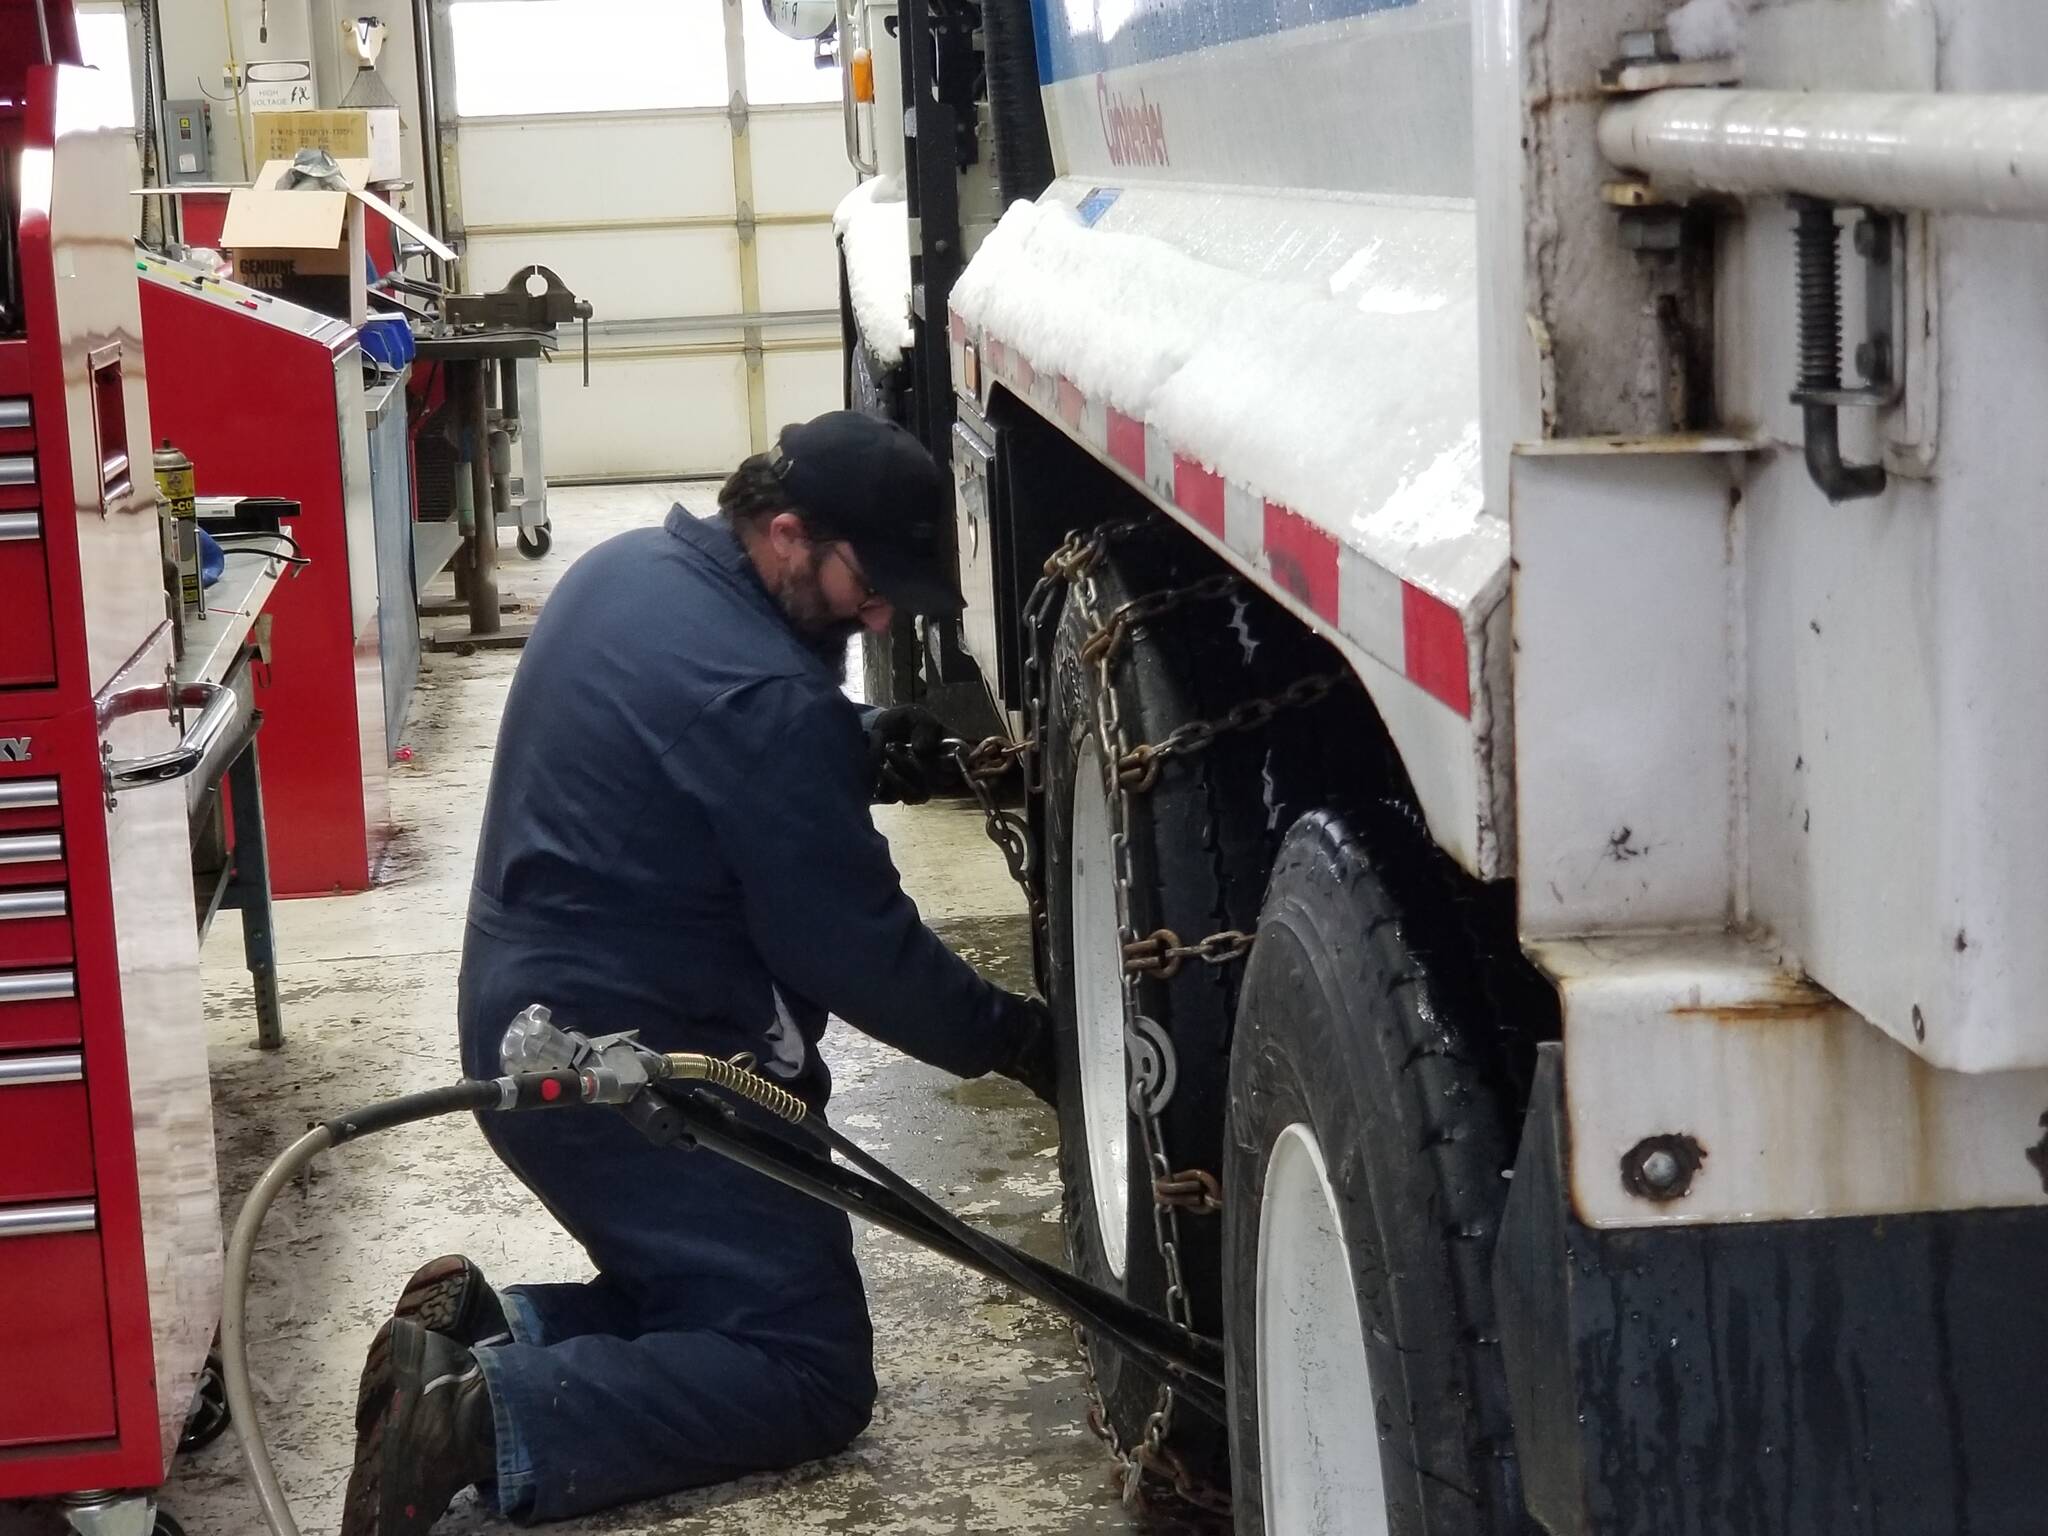 On January 18, 2024, Public Works Department mechanic Joe Ramirez installs chains on the tires of the City’s garbage trucks during a snowstorm. (Photo courtesy of City of Oak Harbor Public Works)